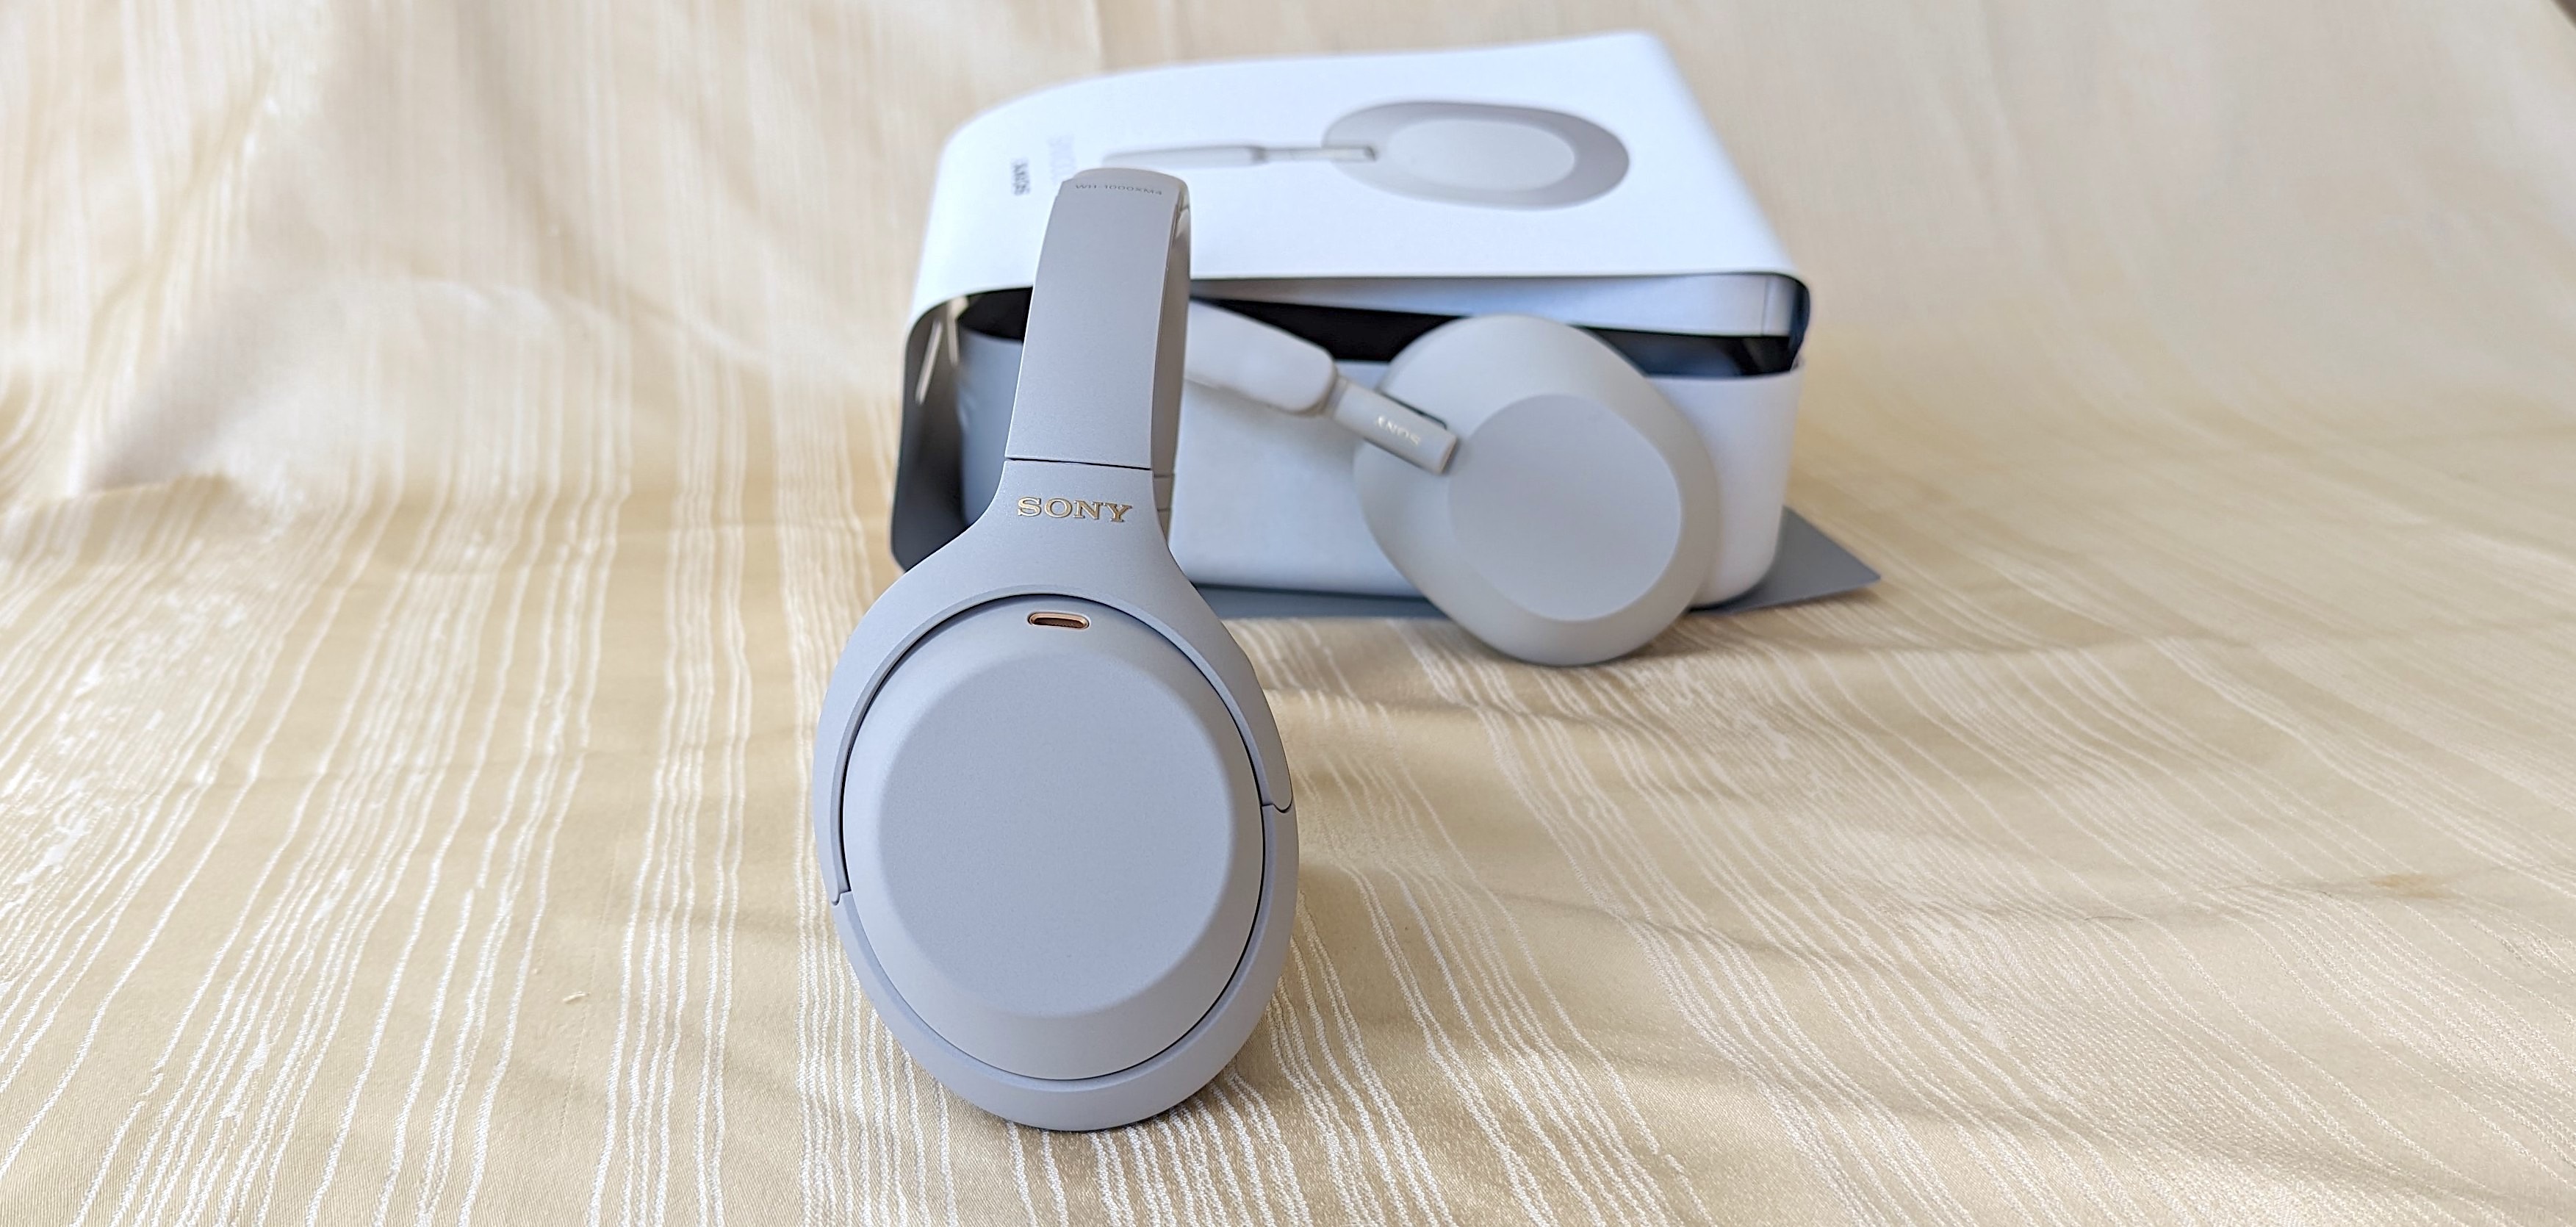 No upgrade necessary: Why I'm sticking with Sony's WH-1000XM4